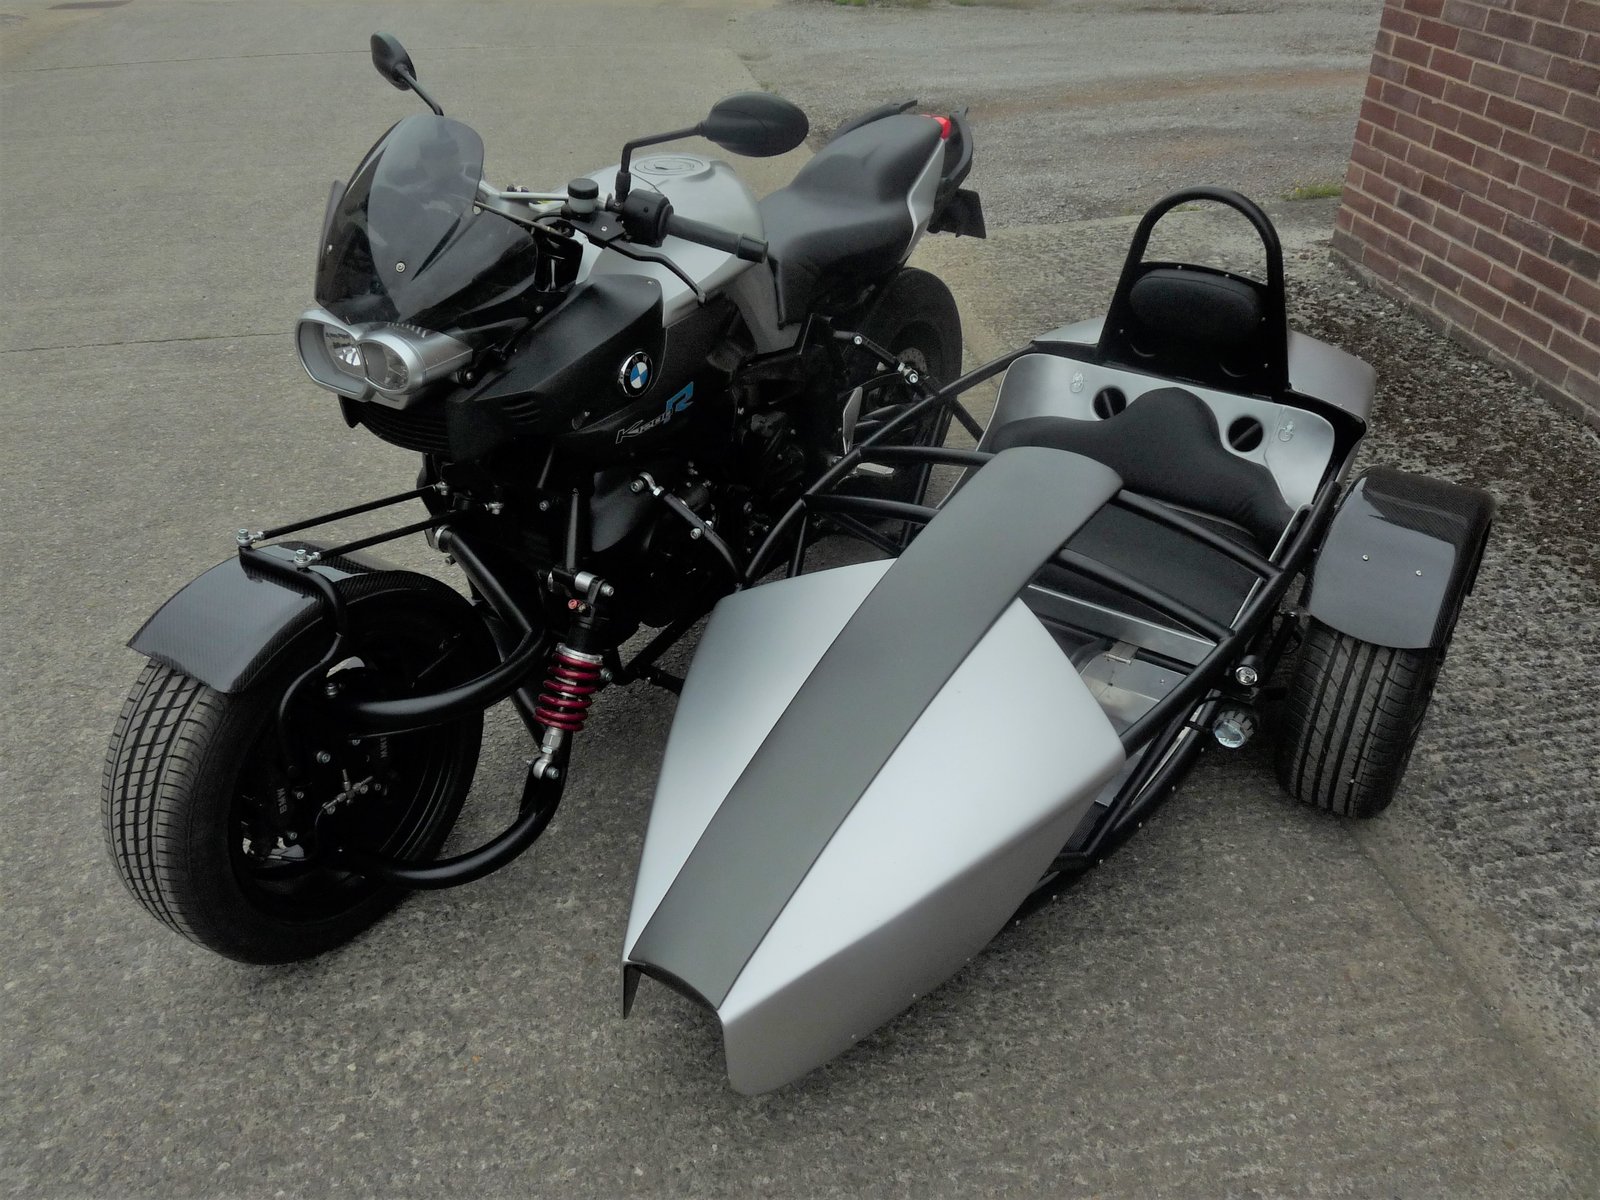 Image of the category BMW Sidecar Outfit with Hub Centre Steering with link to page displaying grouped images.